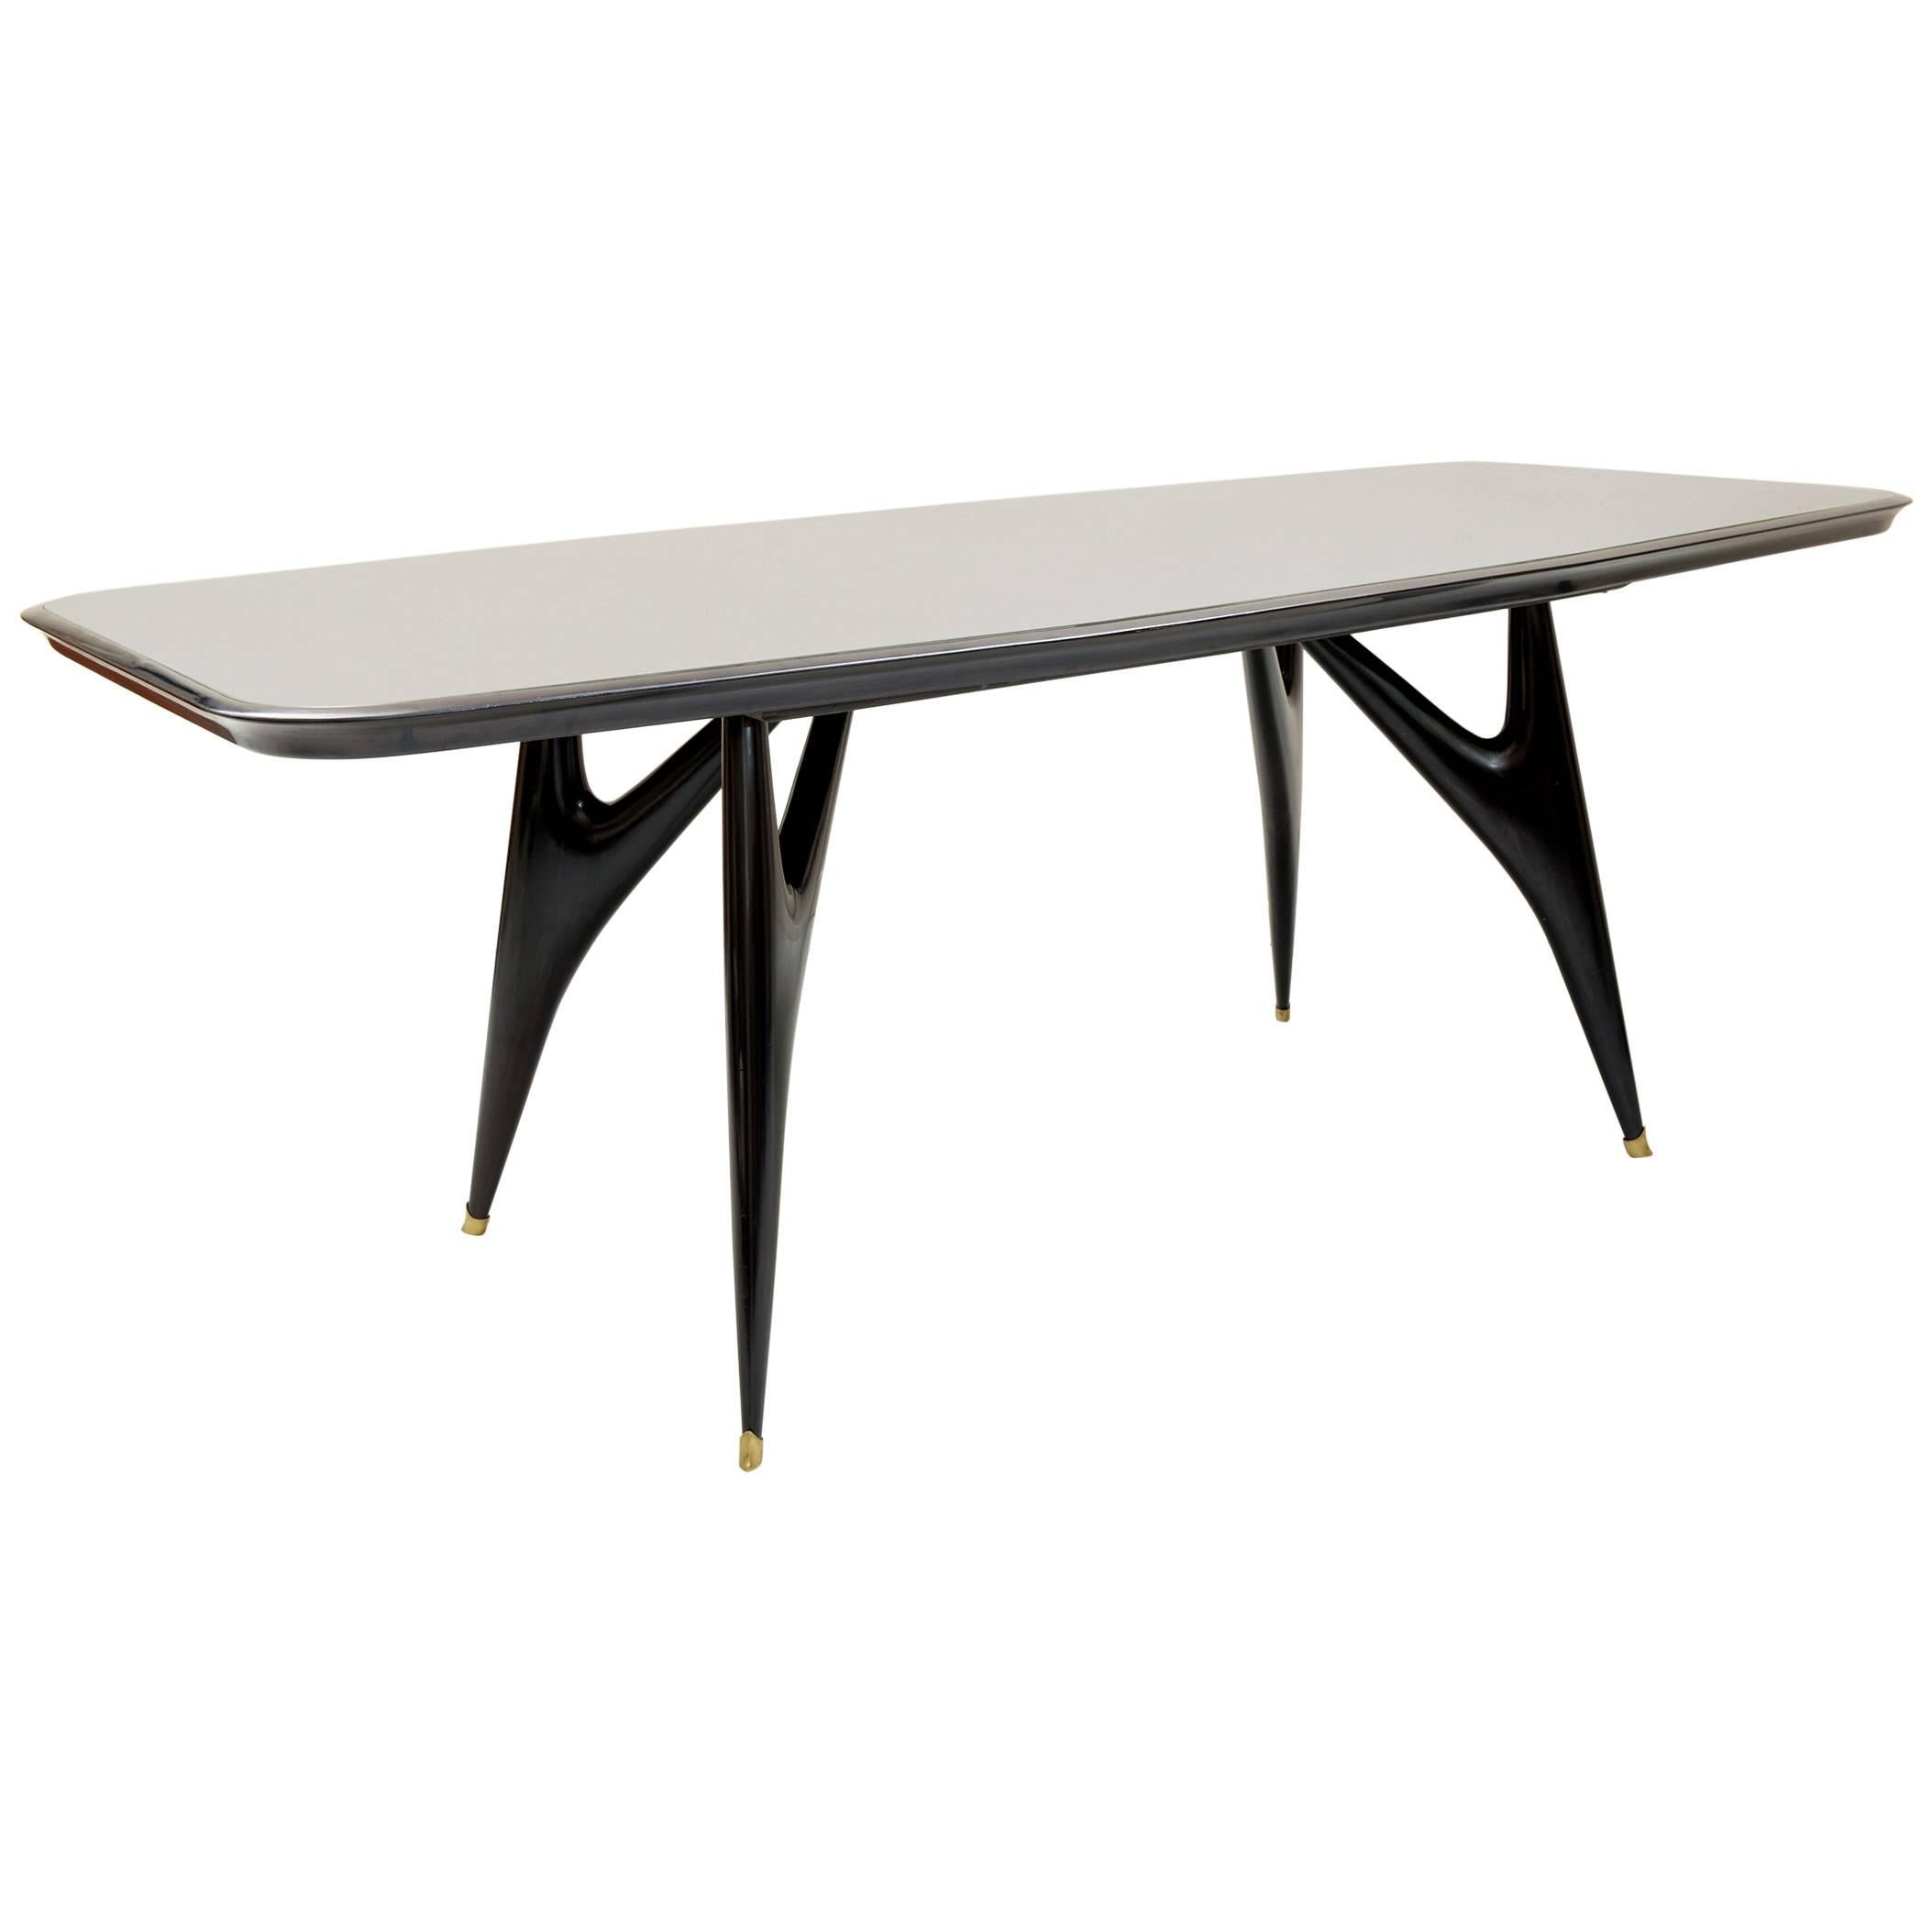 Mid century modern Italian Dining Table Attributed to Arc. Ico Parisi, 1950s